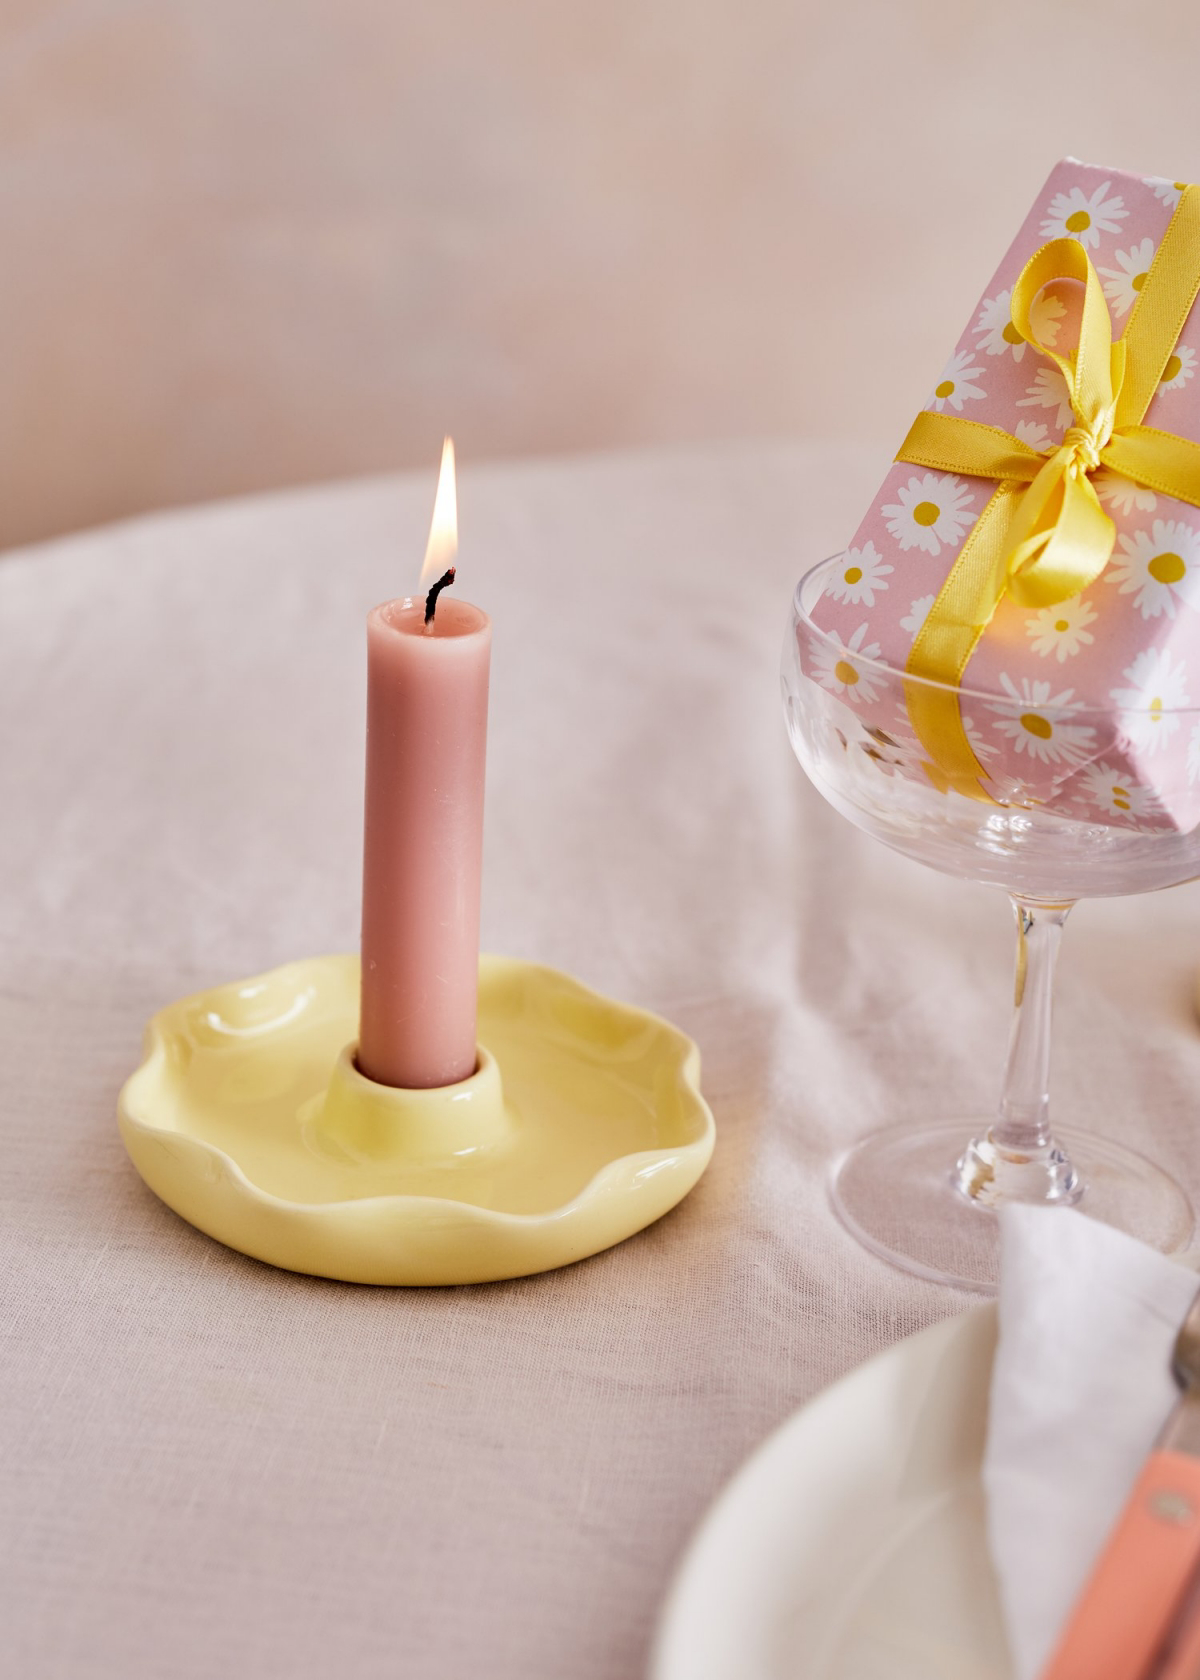 what do the different color candles represent